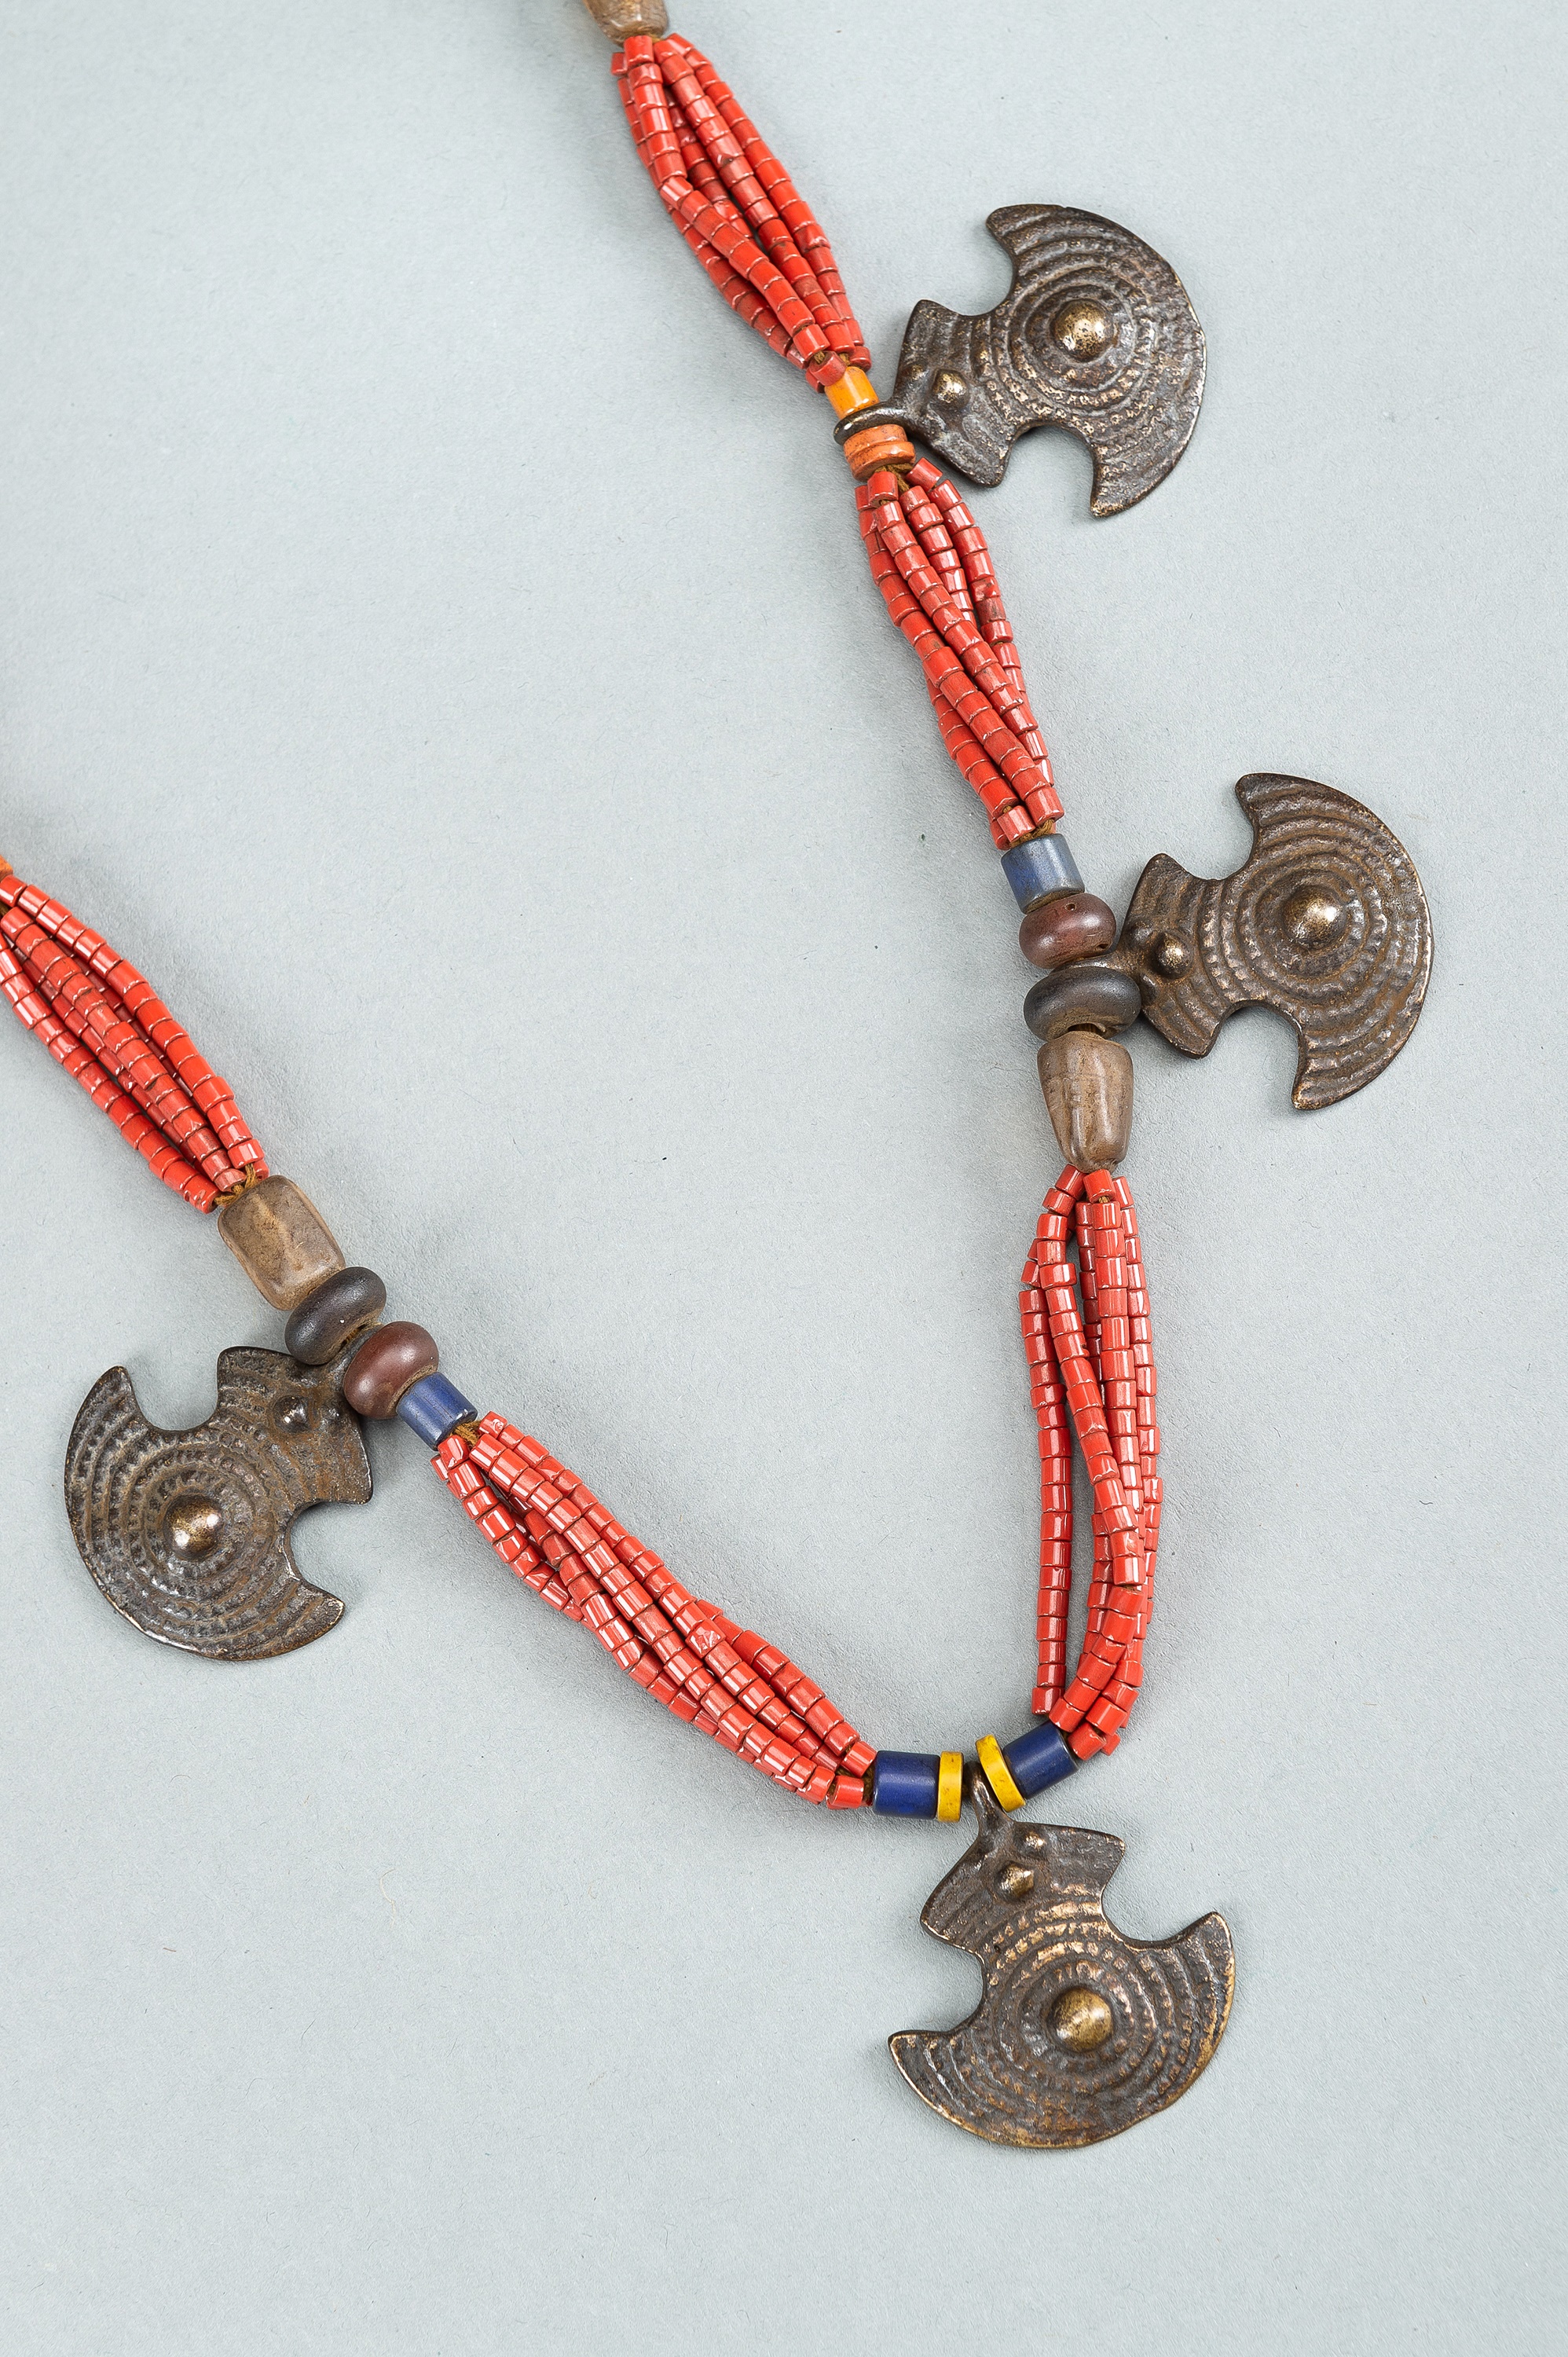 A NAGALAND MULTI-COLORED GLASS AND BRASS NECKLACE, c. 1900s - Image 7 of 11